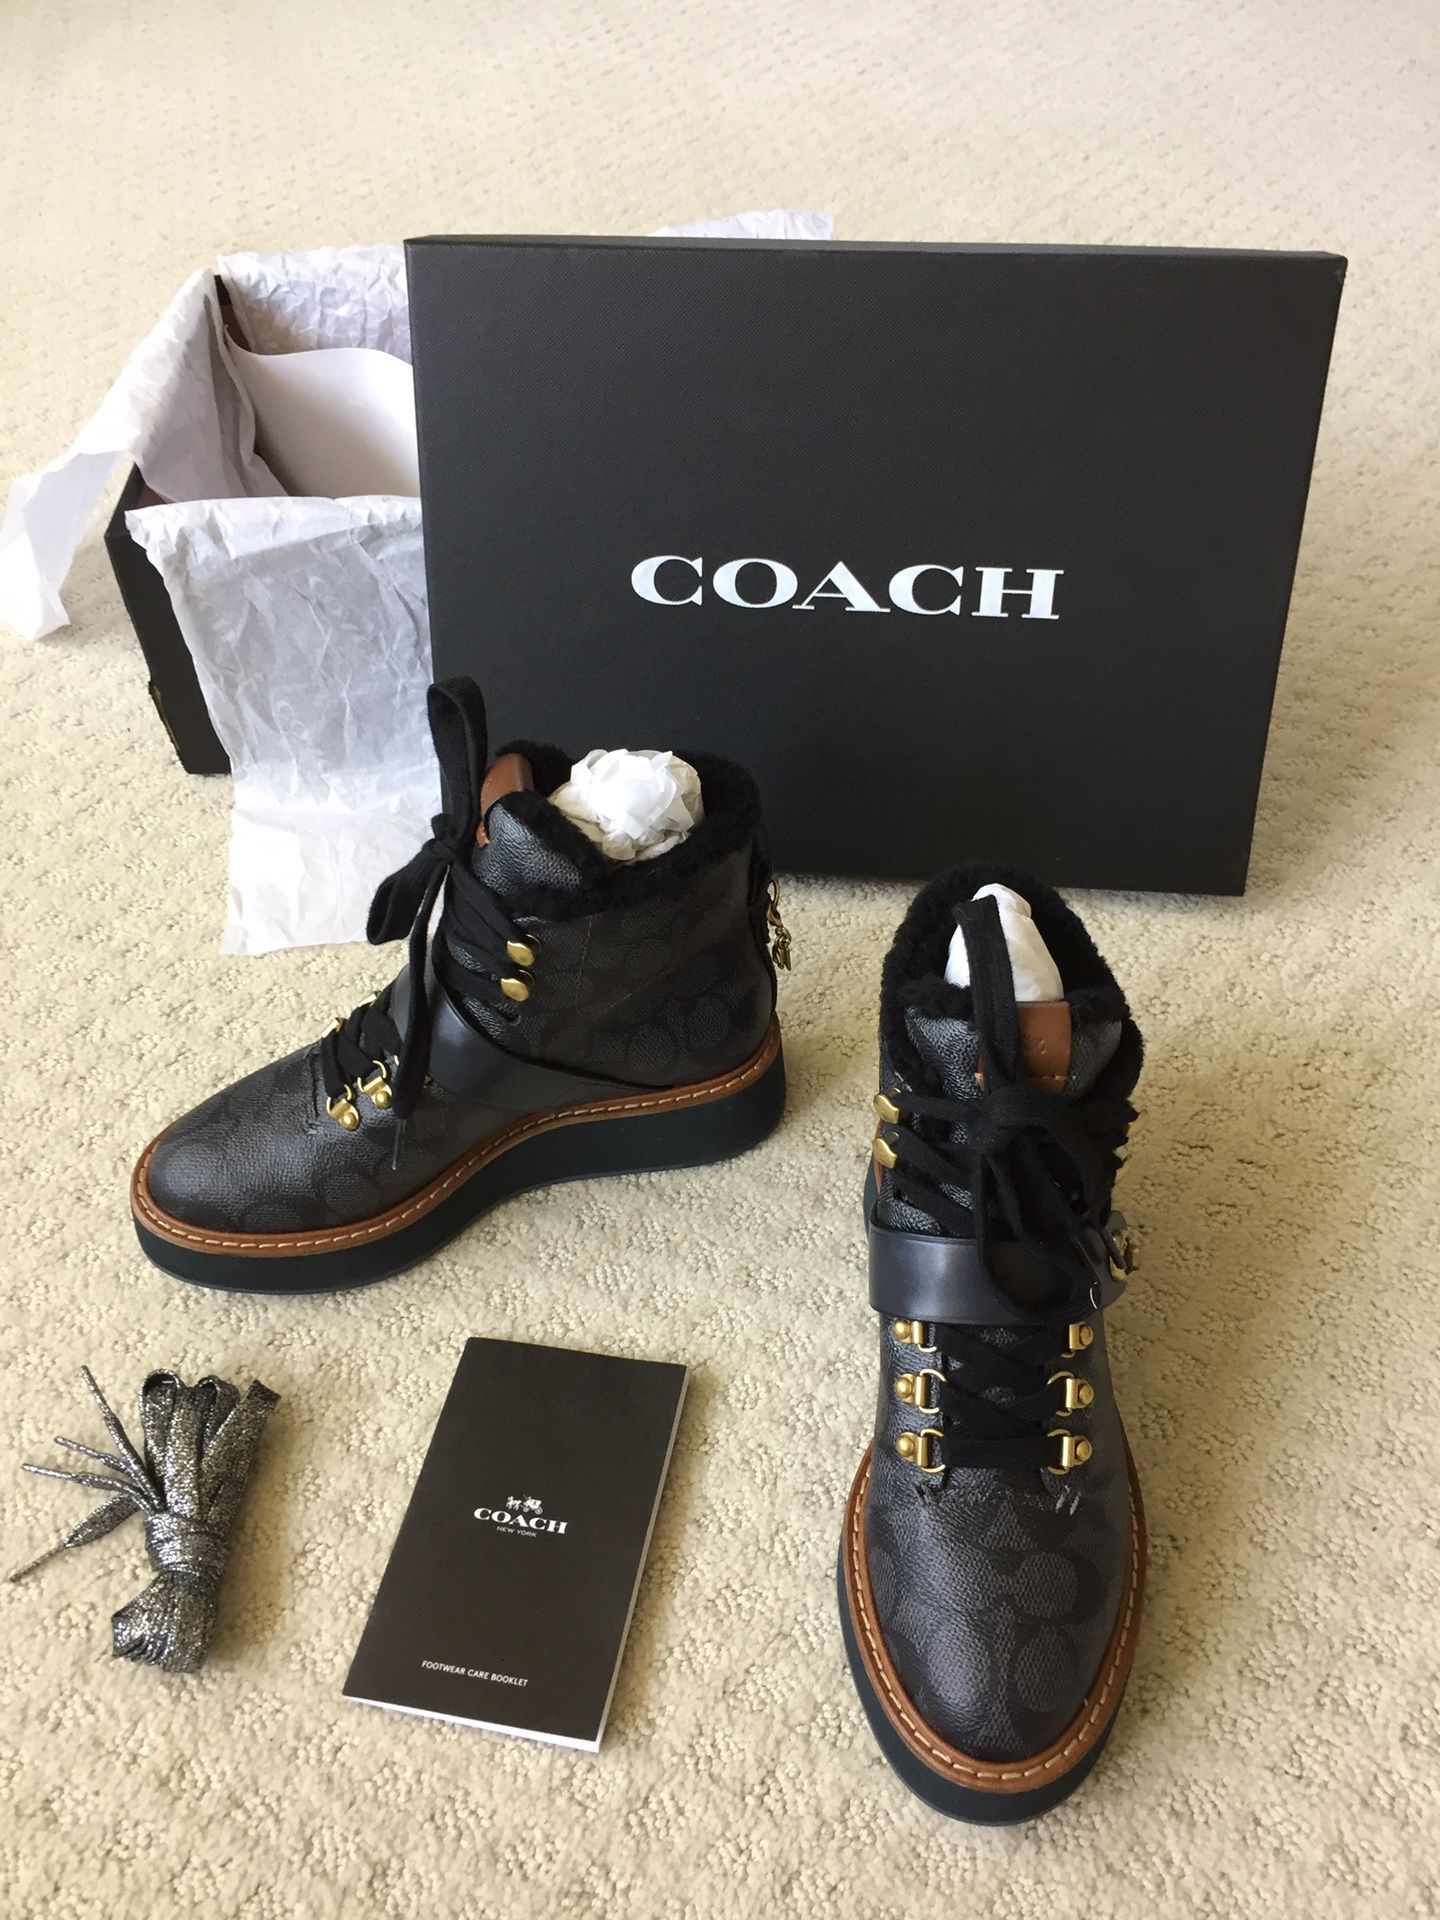 New Coach booties for women size 5.5